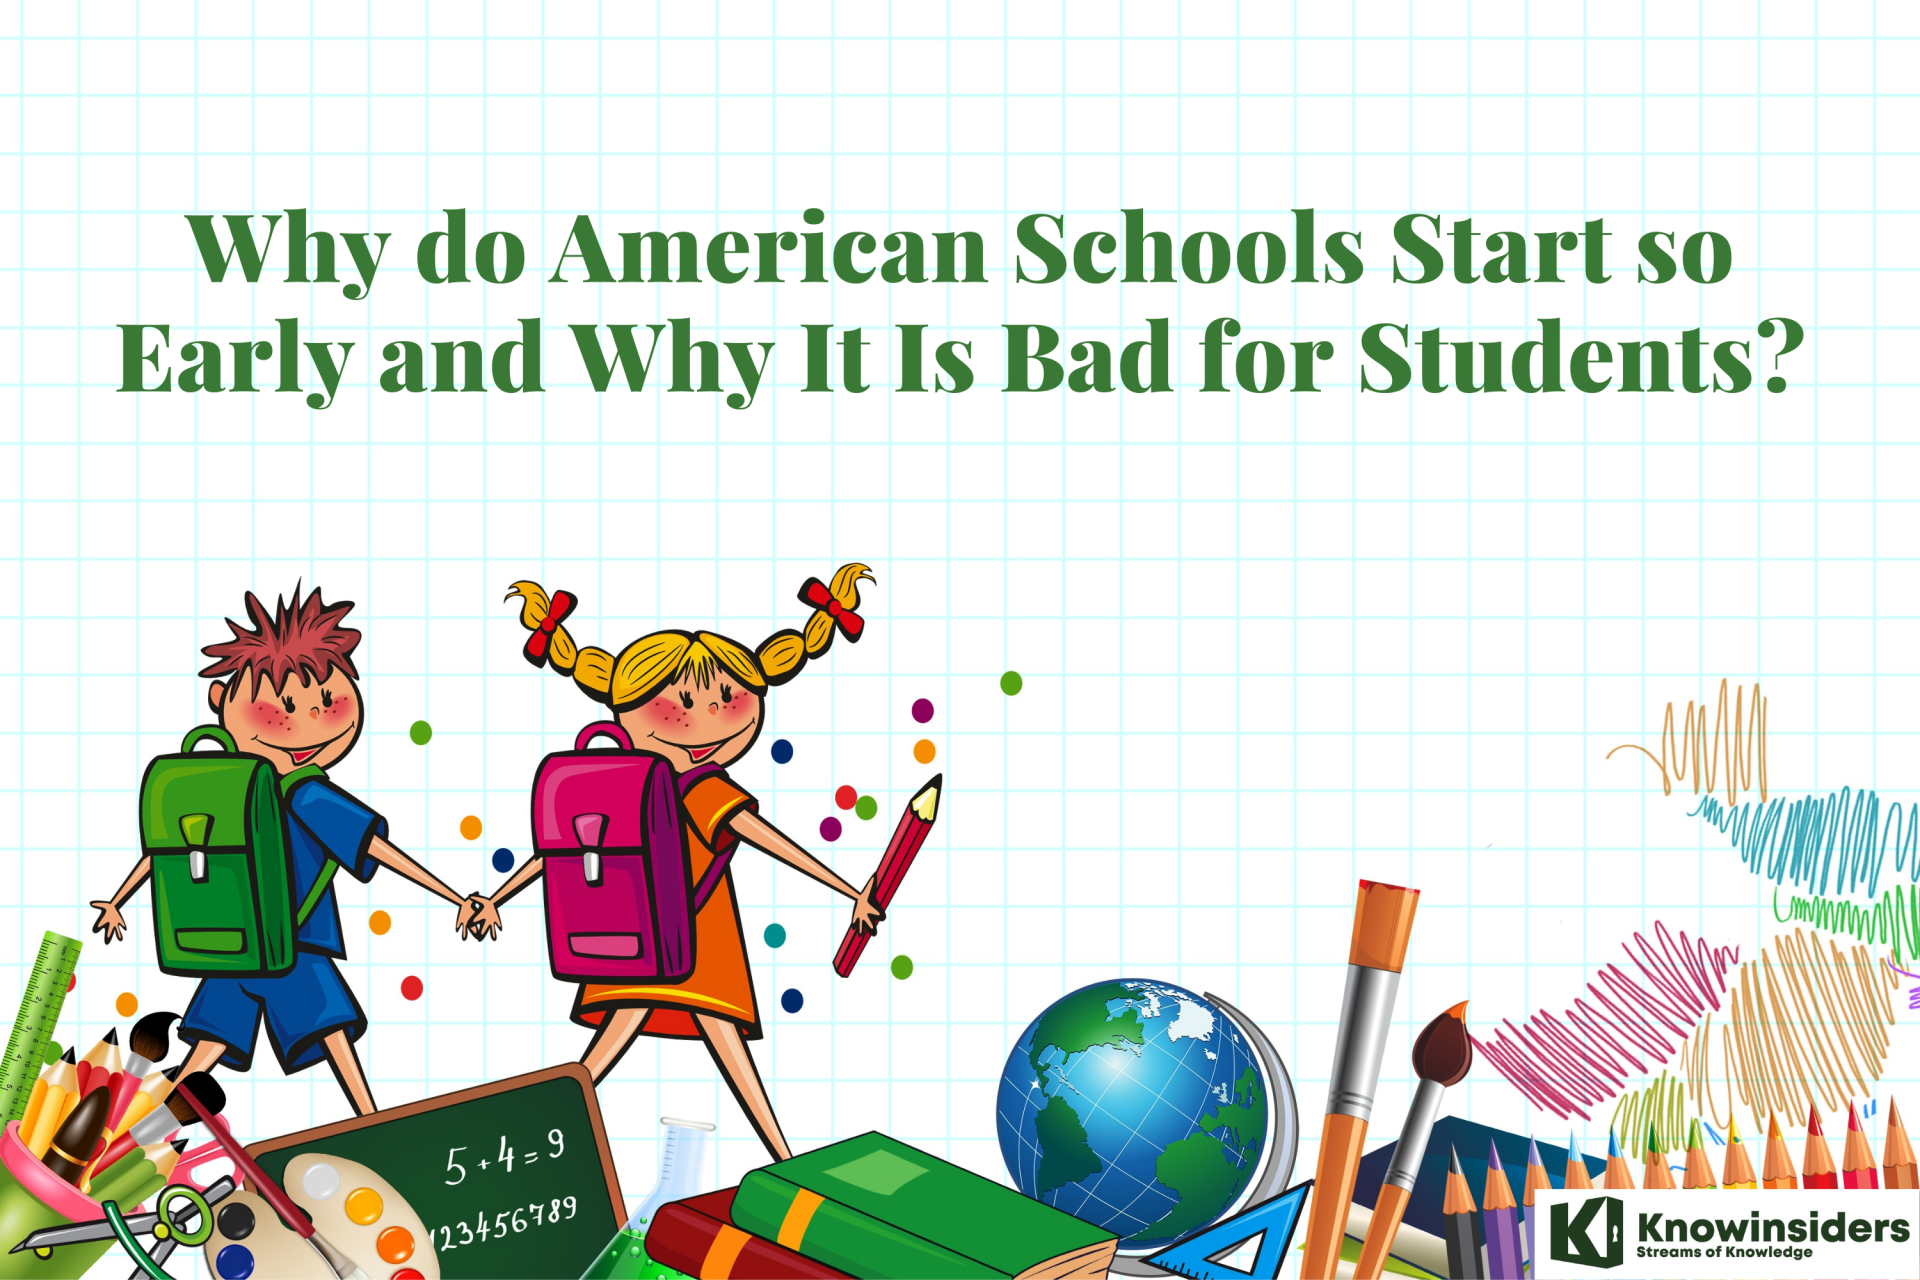 Why do American Schools Start so Early and Bad or Good for Students?